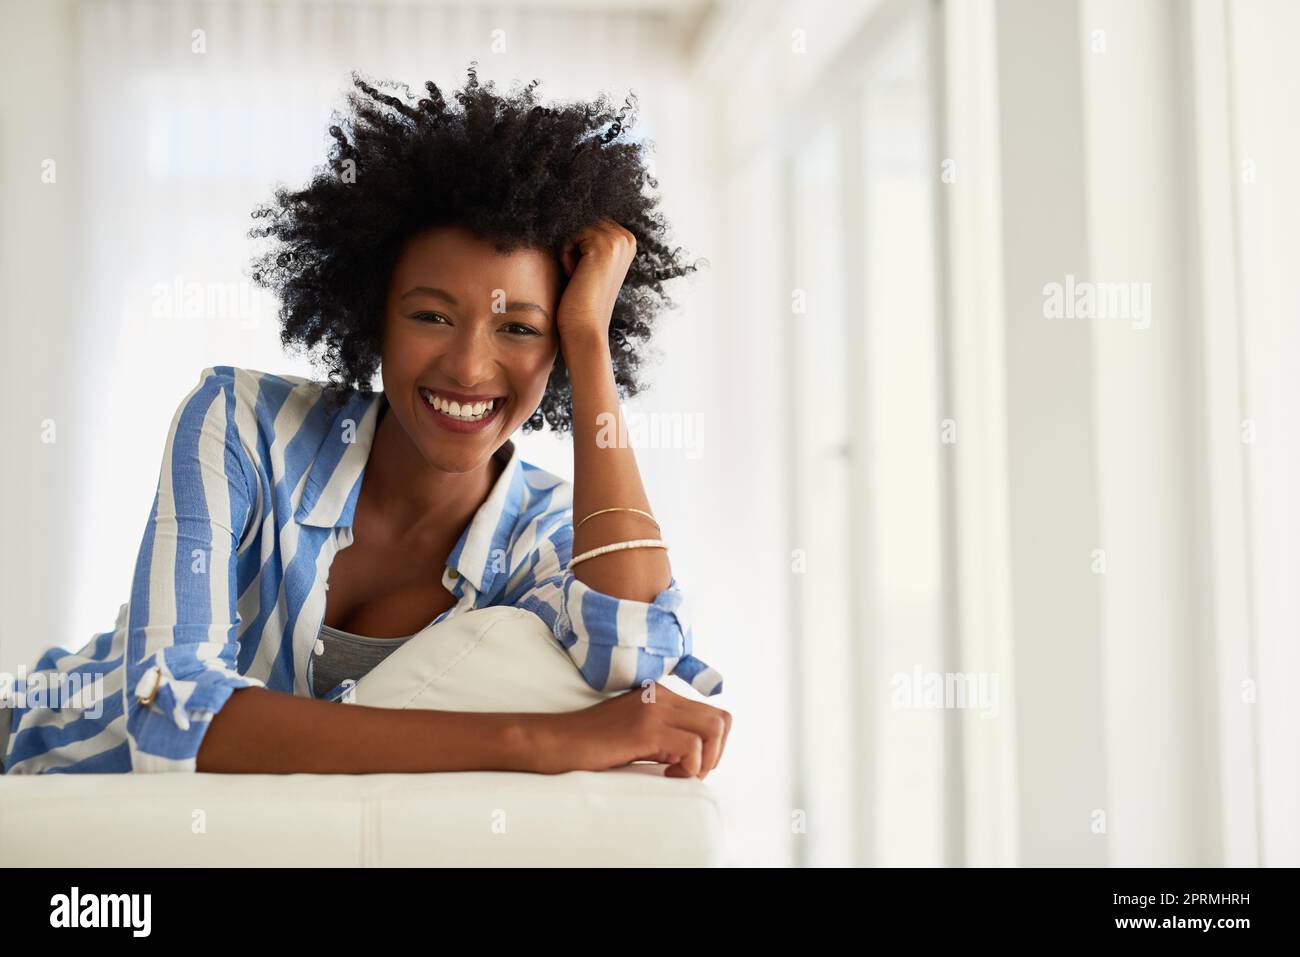 My weekends are all about taking it easy. Portrait of a young woman relaxing at home. Stock Photo